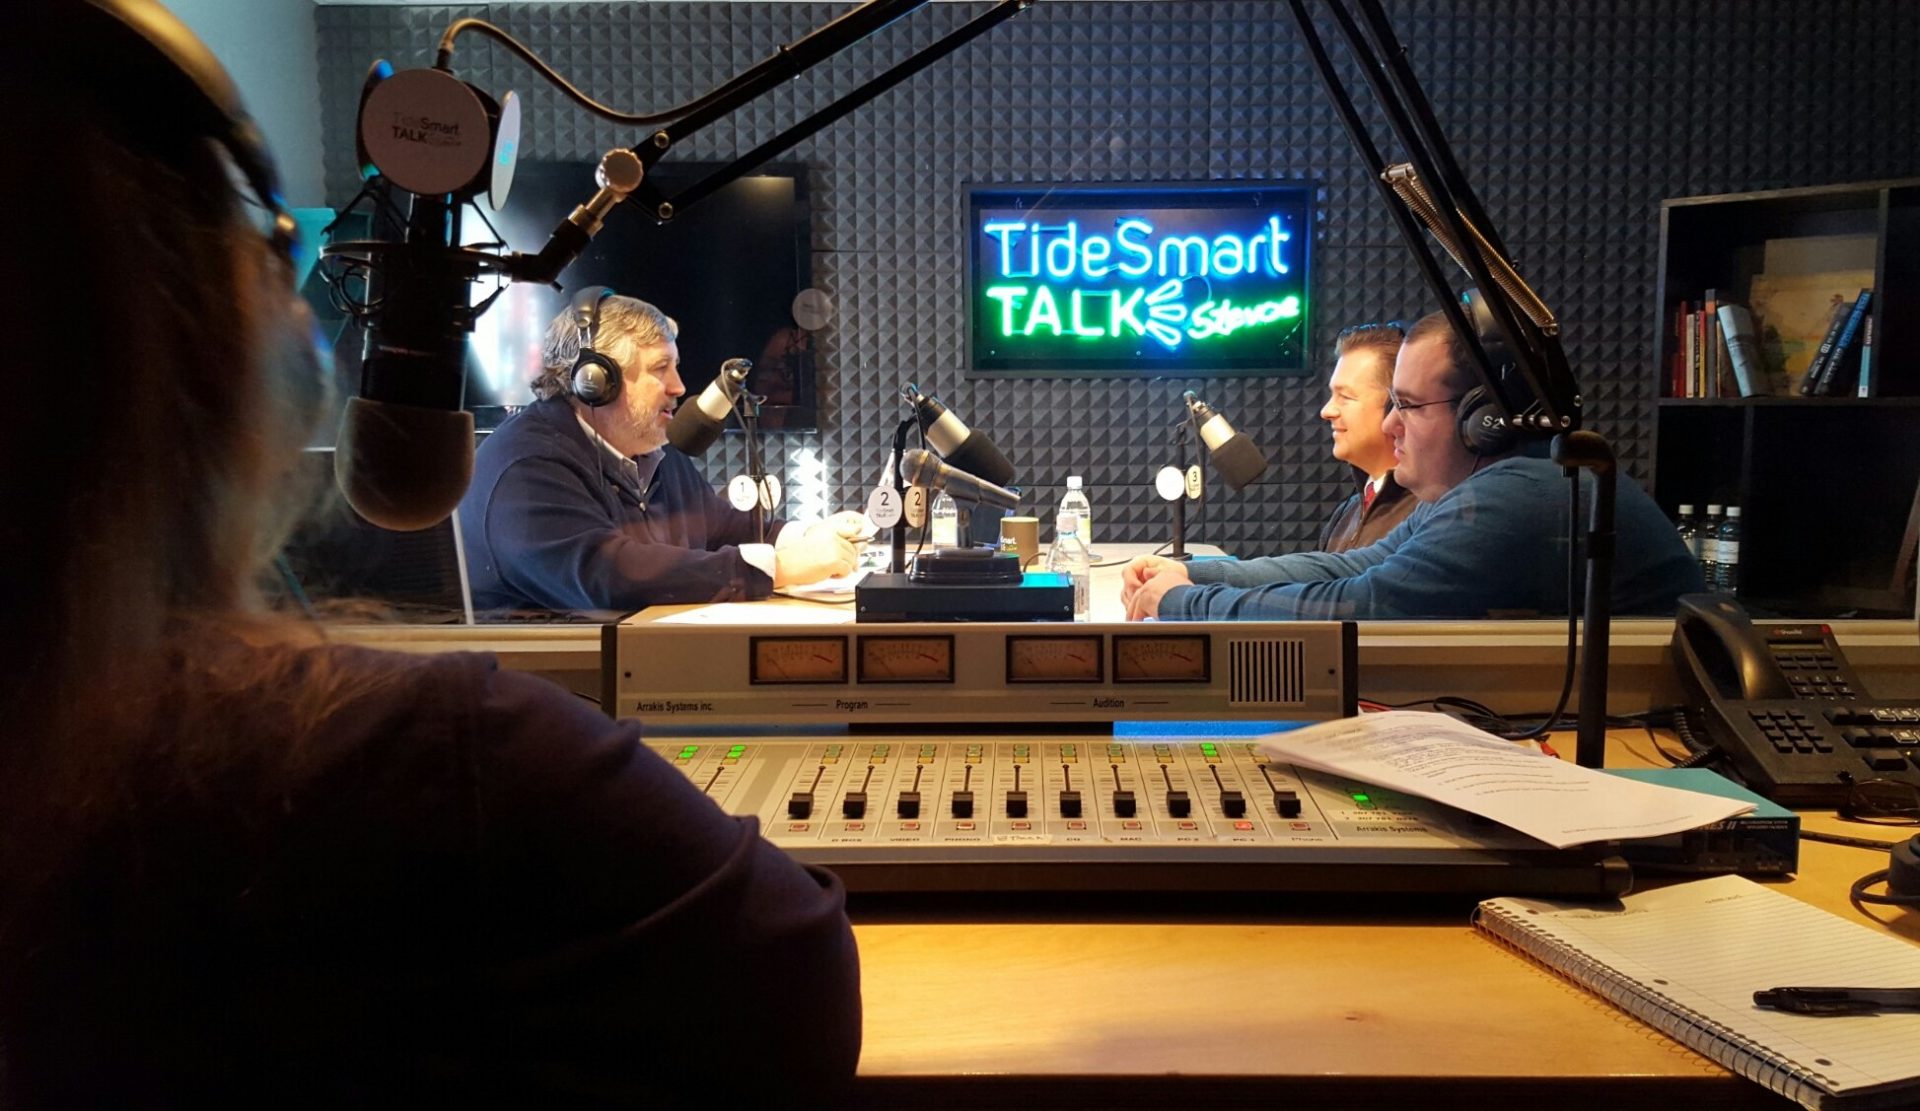 Host of TideSmart Talk with Stevoe, Steve Woods, welcomed Scout Executive, Eric Tarbox and Communications Director, Tucker Adams (at right).